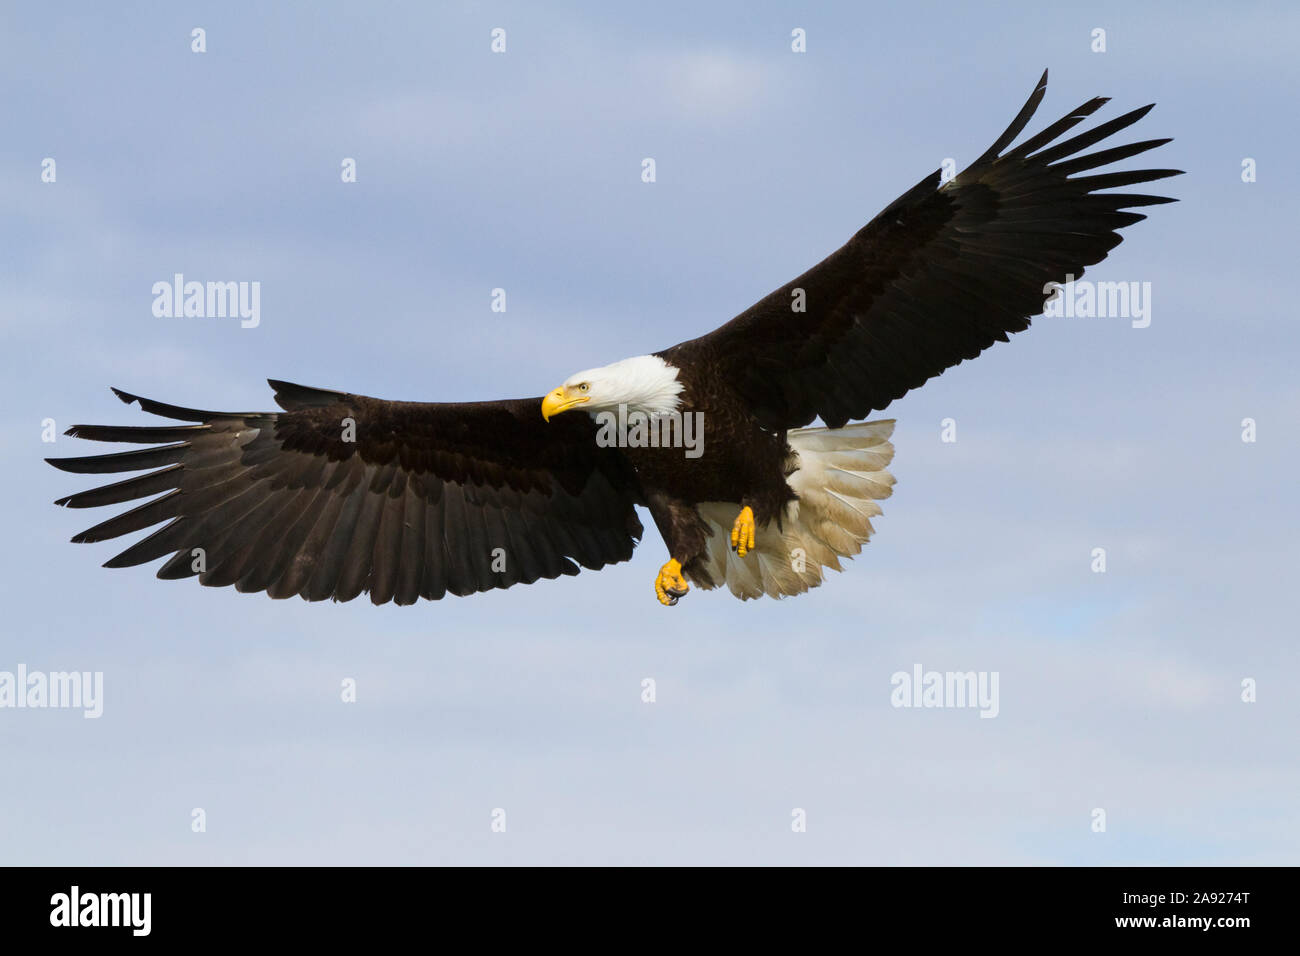 A Mature Bald Eagle Spreads Its Wings And Prepares To Land, Homer Spit, Kenai Peninsula, Southcentral Alaska, Spring Stock Photo